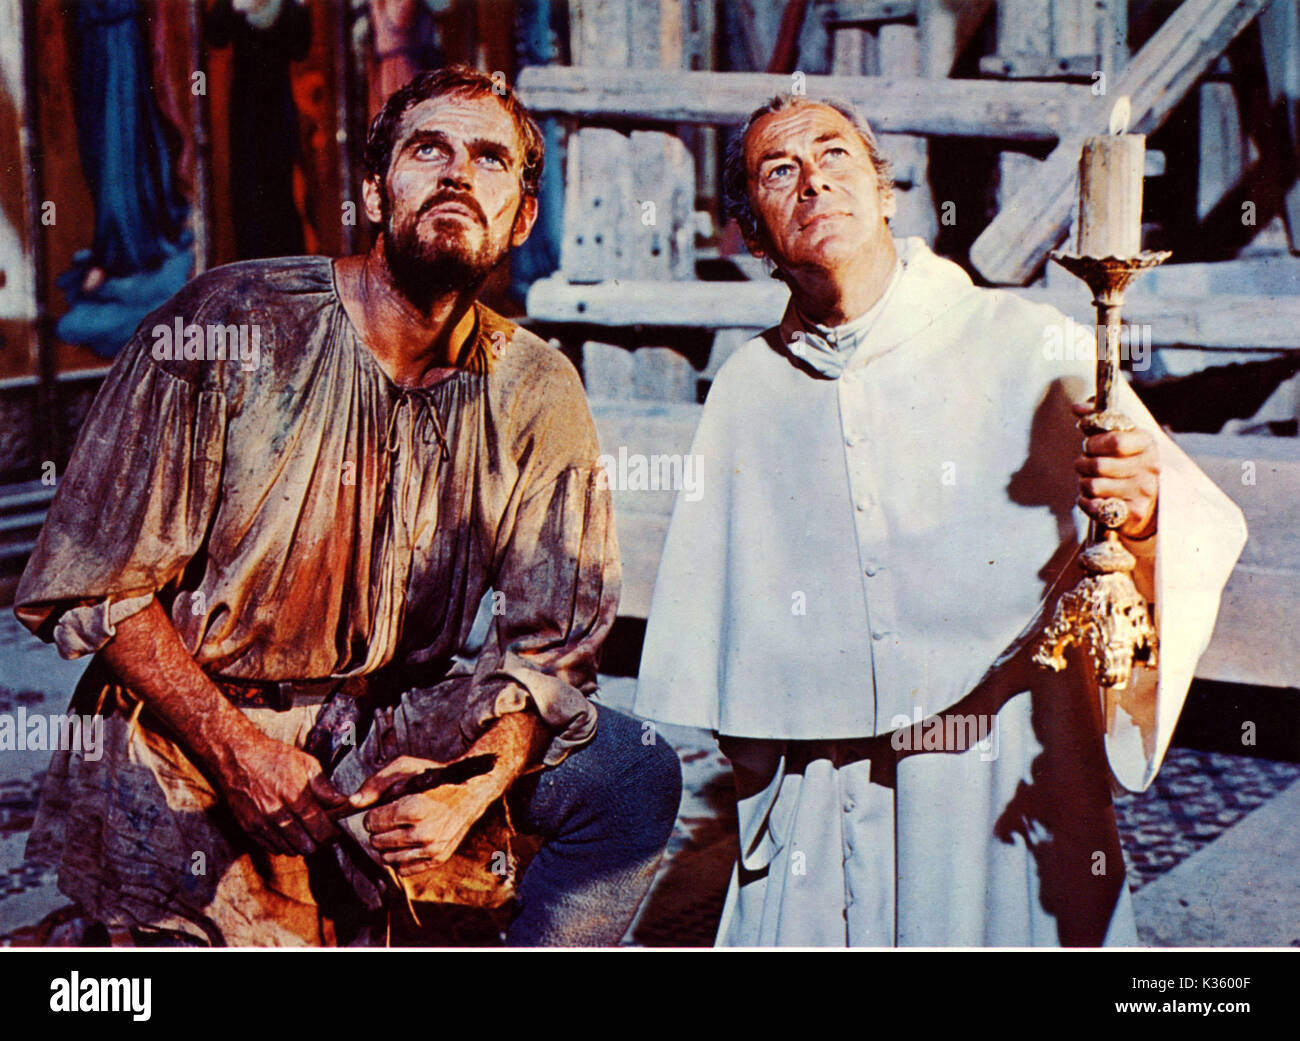 THE AGONY AND THE ECSTASY C20TH FOX CHARLTON HESTON as Michelangelo, REX HARRISON as Pope Julius II   THE AGONY AND THE ECSTASY CHARLTON HESTON, REX HARRISON     Date: 1965 Stock Photo